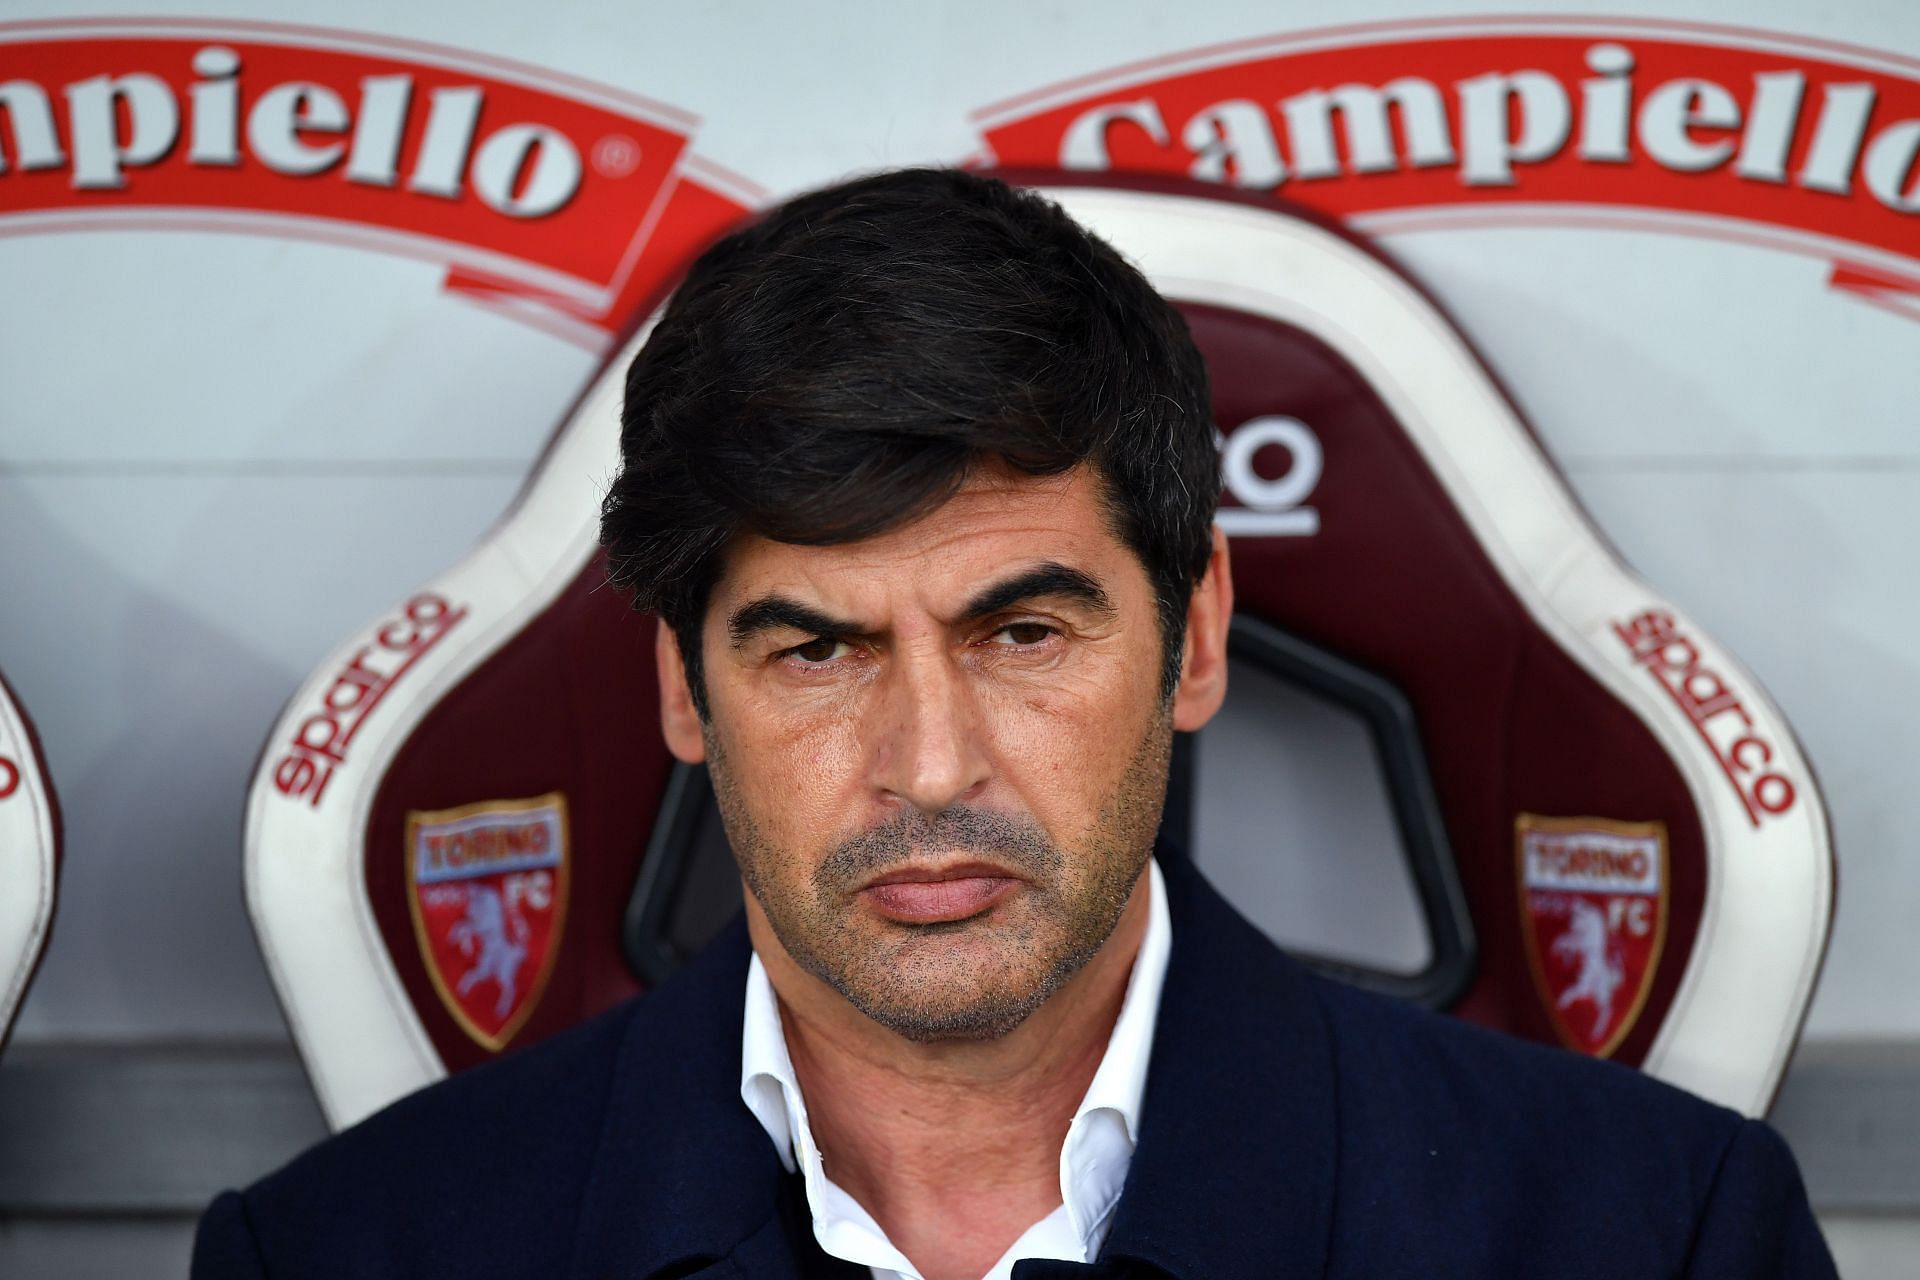 Former AS Roma manager Paulo Fonseca came up short against Manchester United last season.